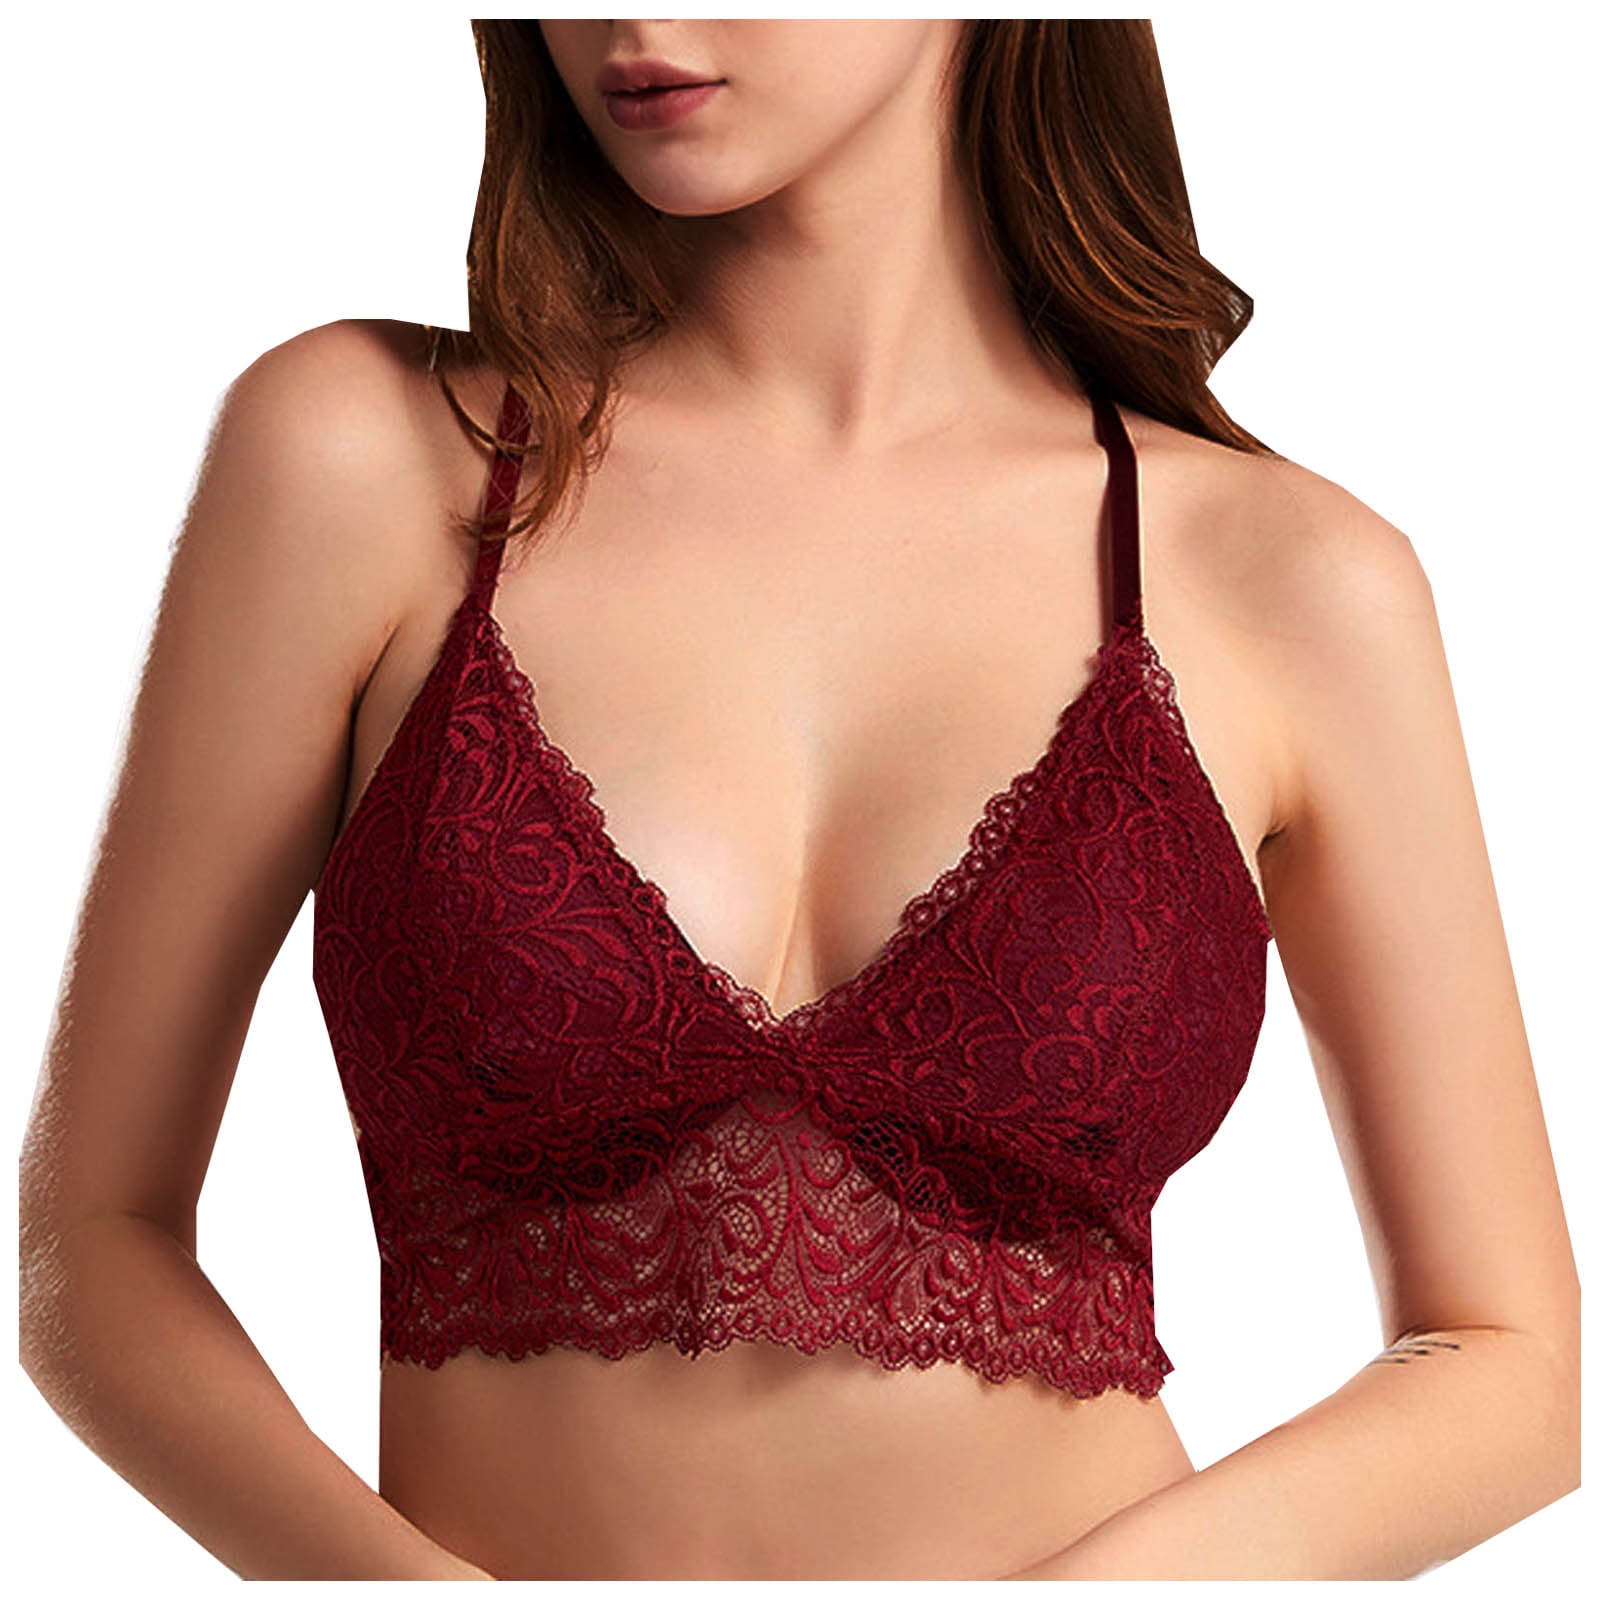 Knosfe Wireless Bra for Women Comfort Cami Lace Bralette Wine Red L 